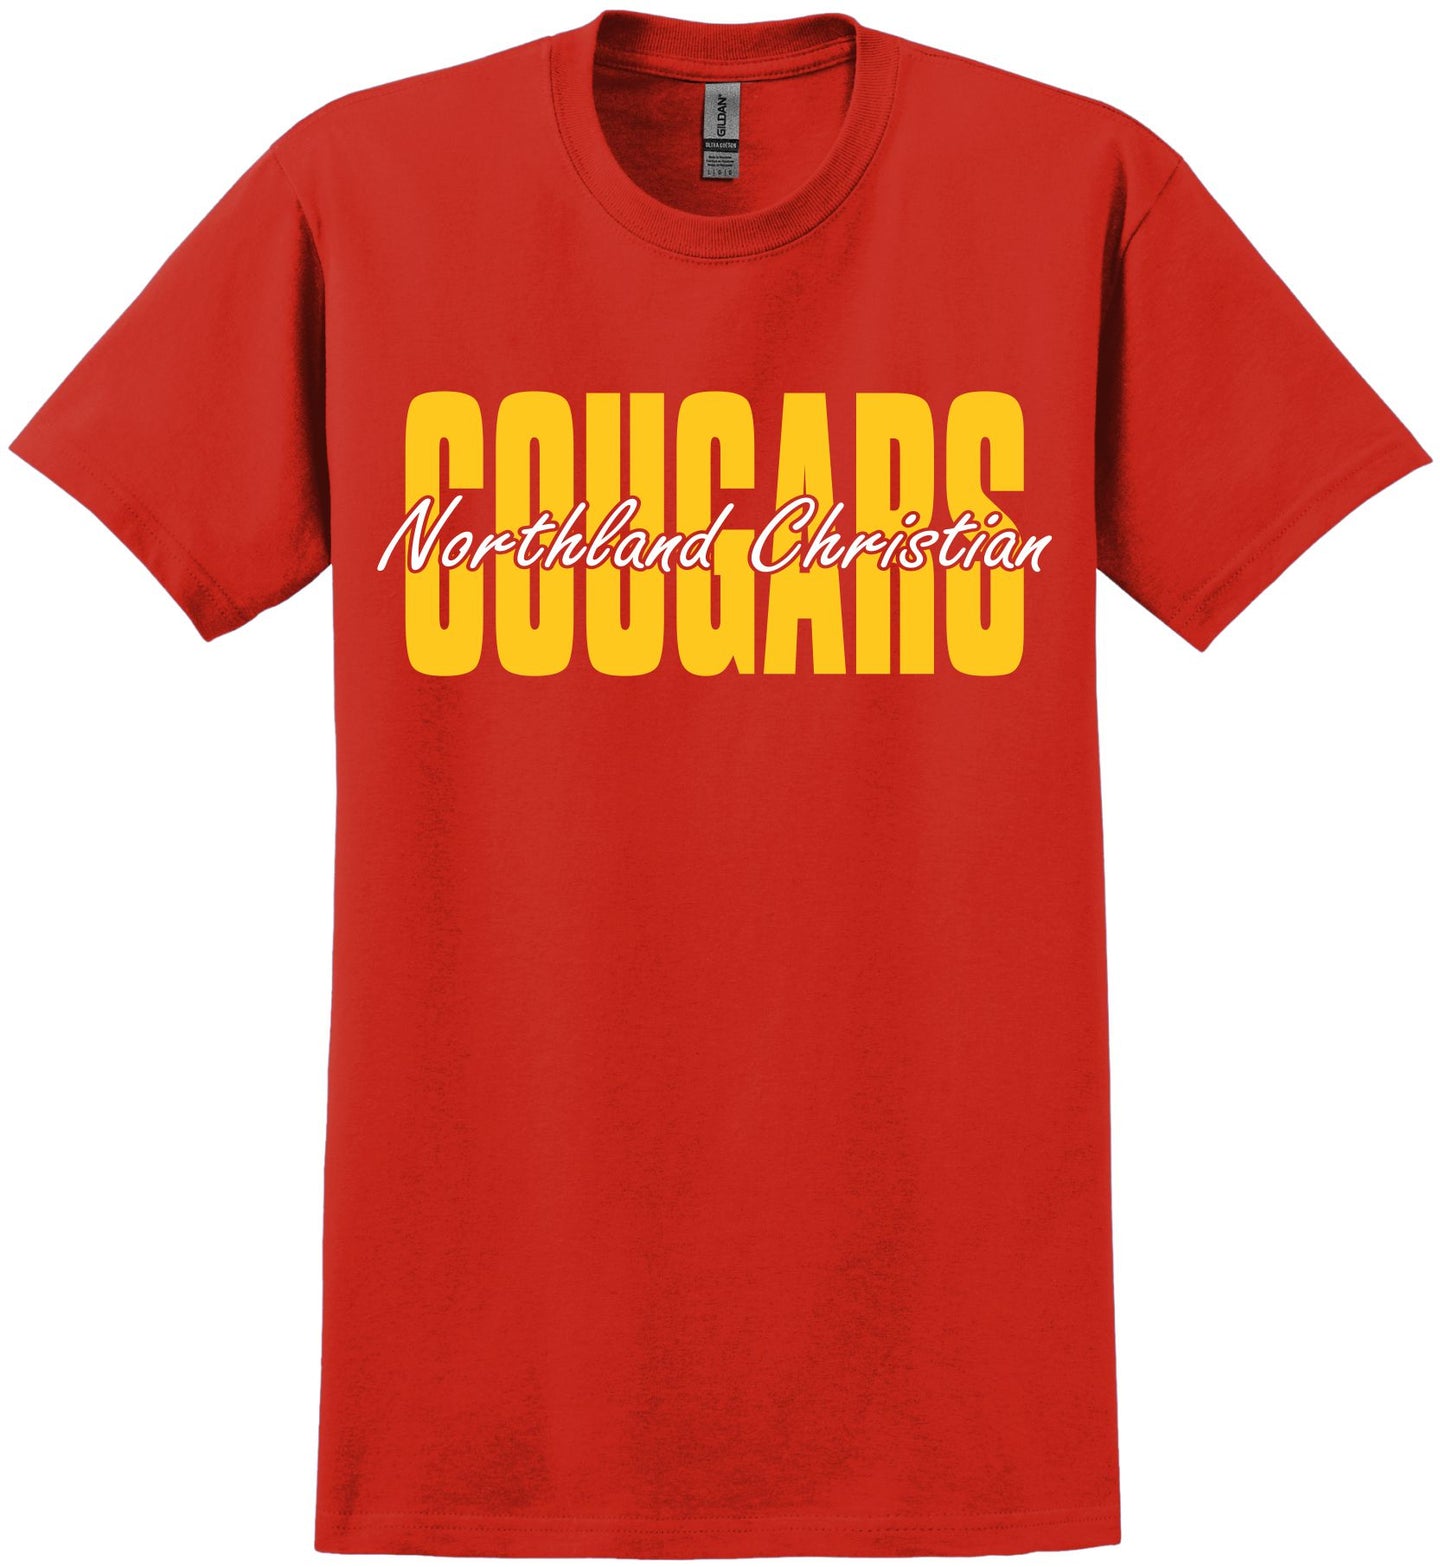 NC Cougars T Shirt - Red